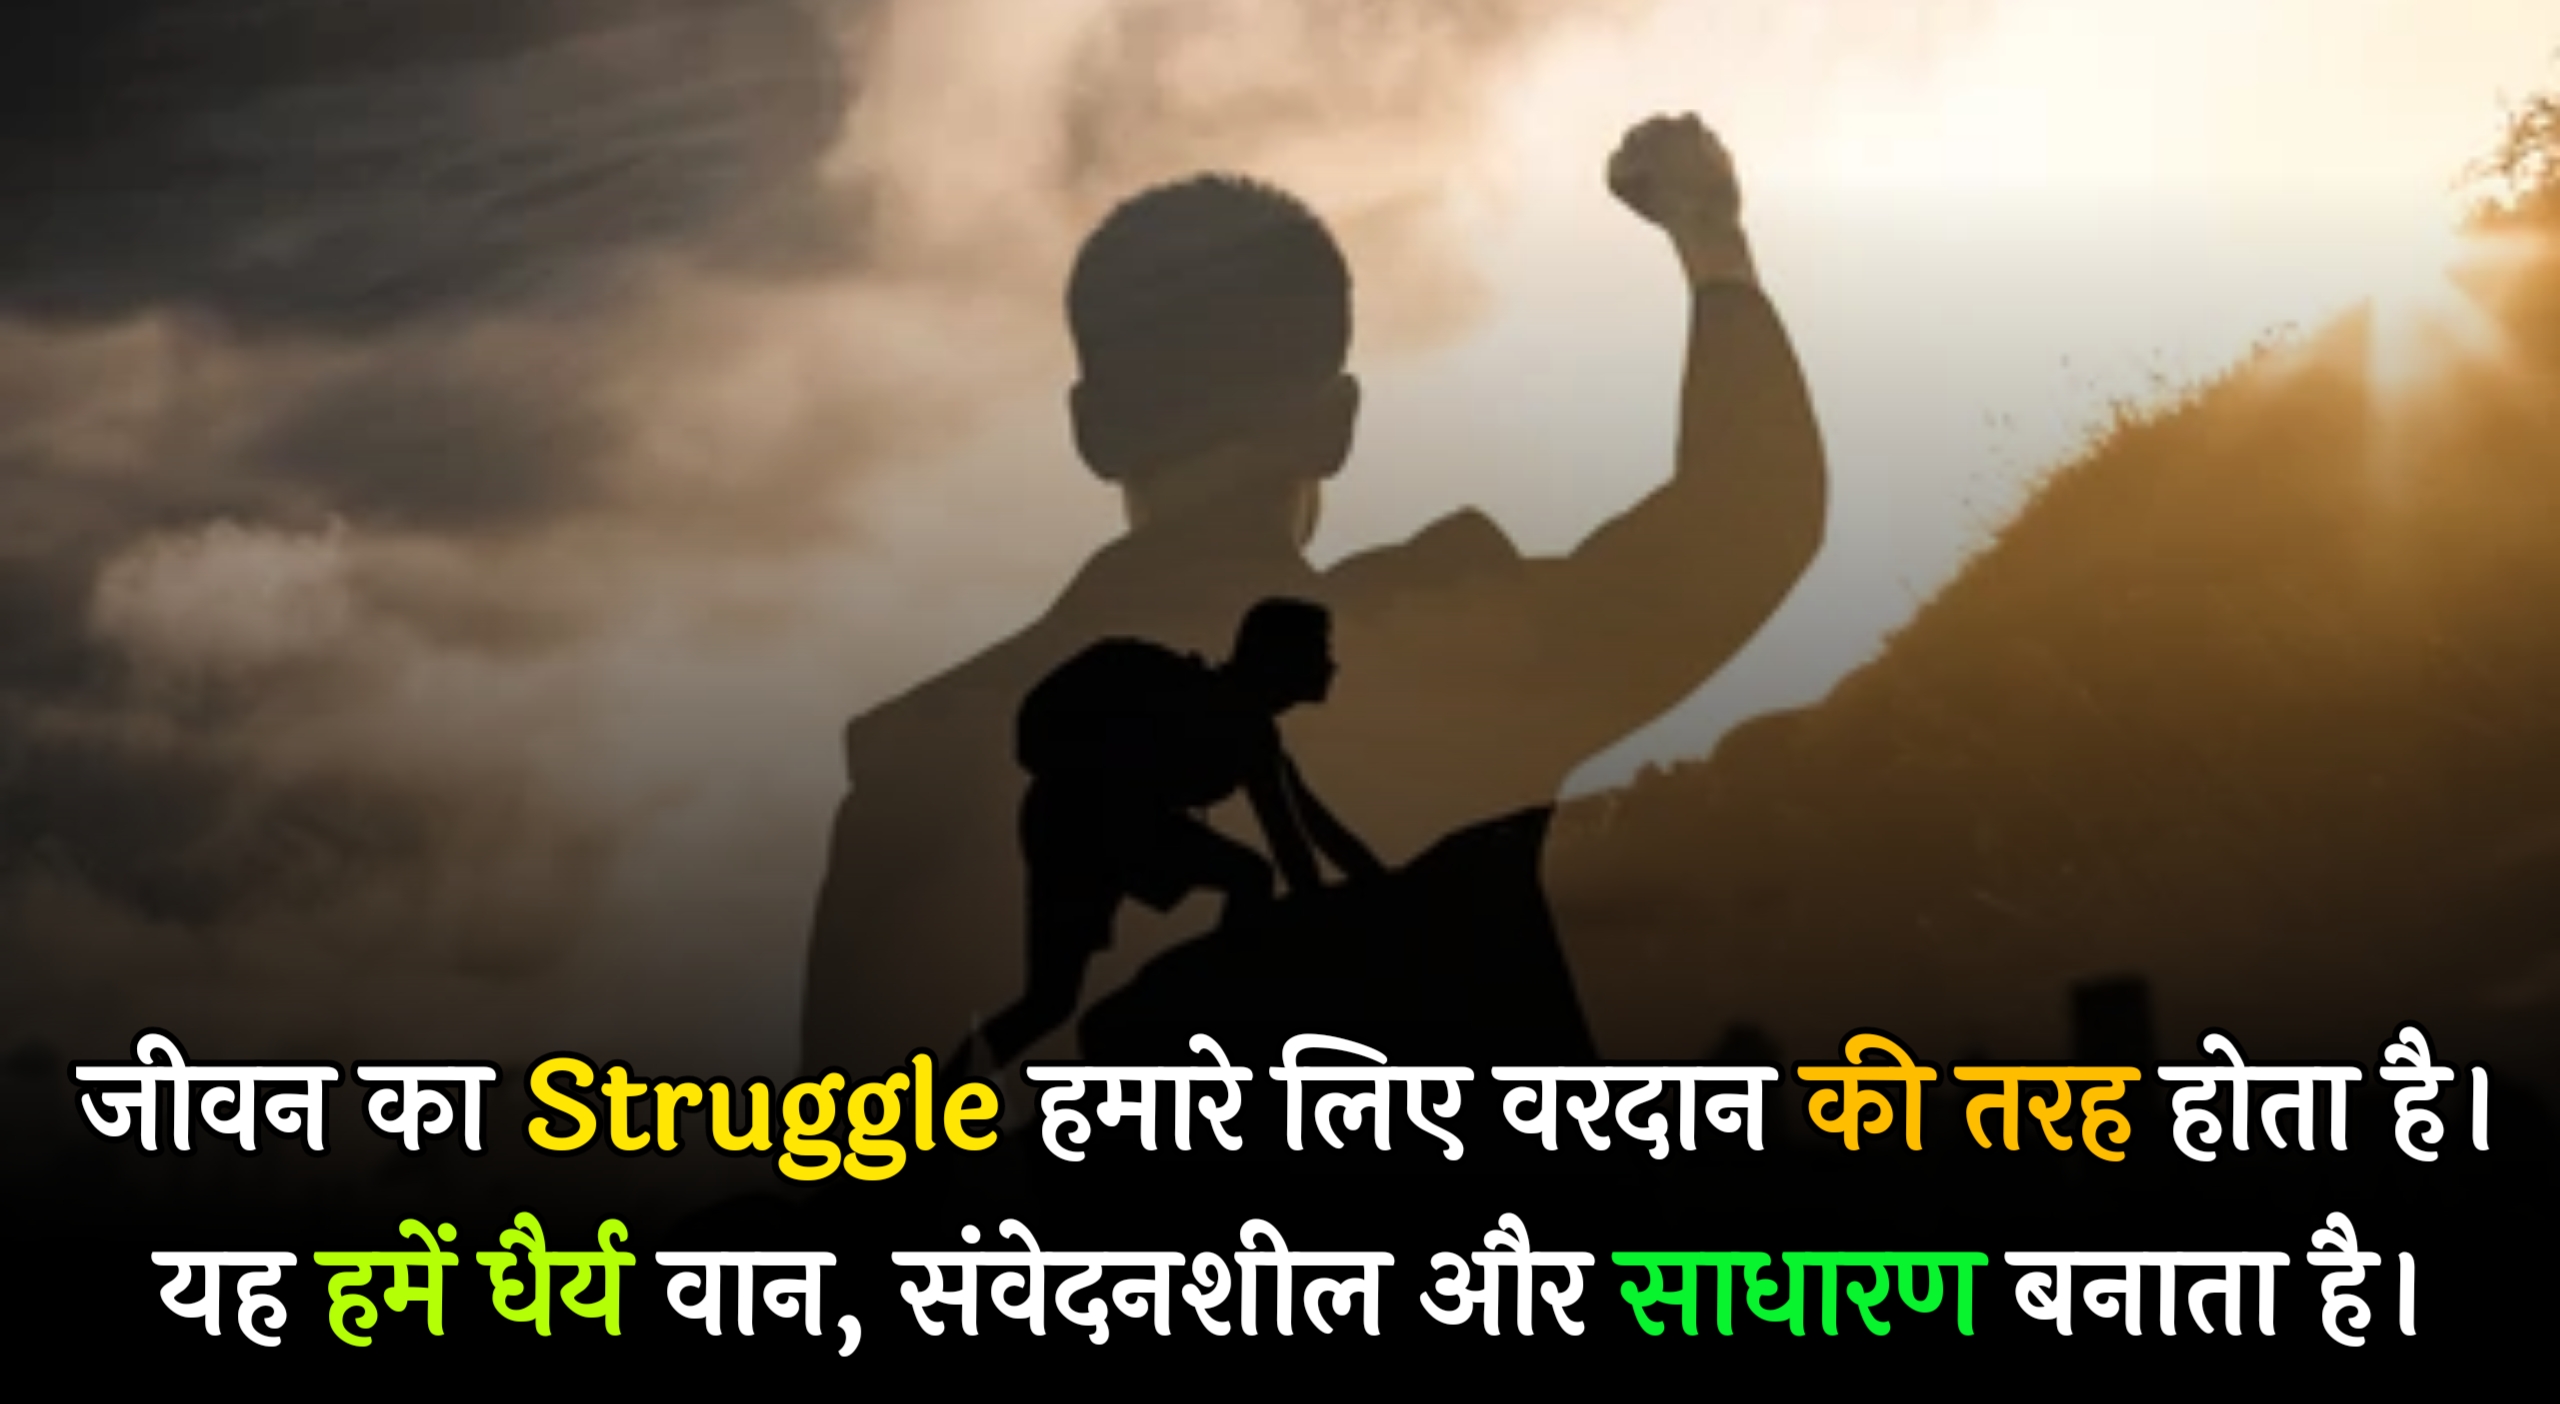 Struggle Motivational Quotes In Hindi,inspirational struggle motivational quotes in hindi,success struggle motivational quotes in hindi,thoughts struggle motivational quotes in hindi,life reality motivational quotes in hindi,motivational quotes in hindi for students